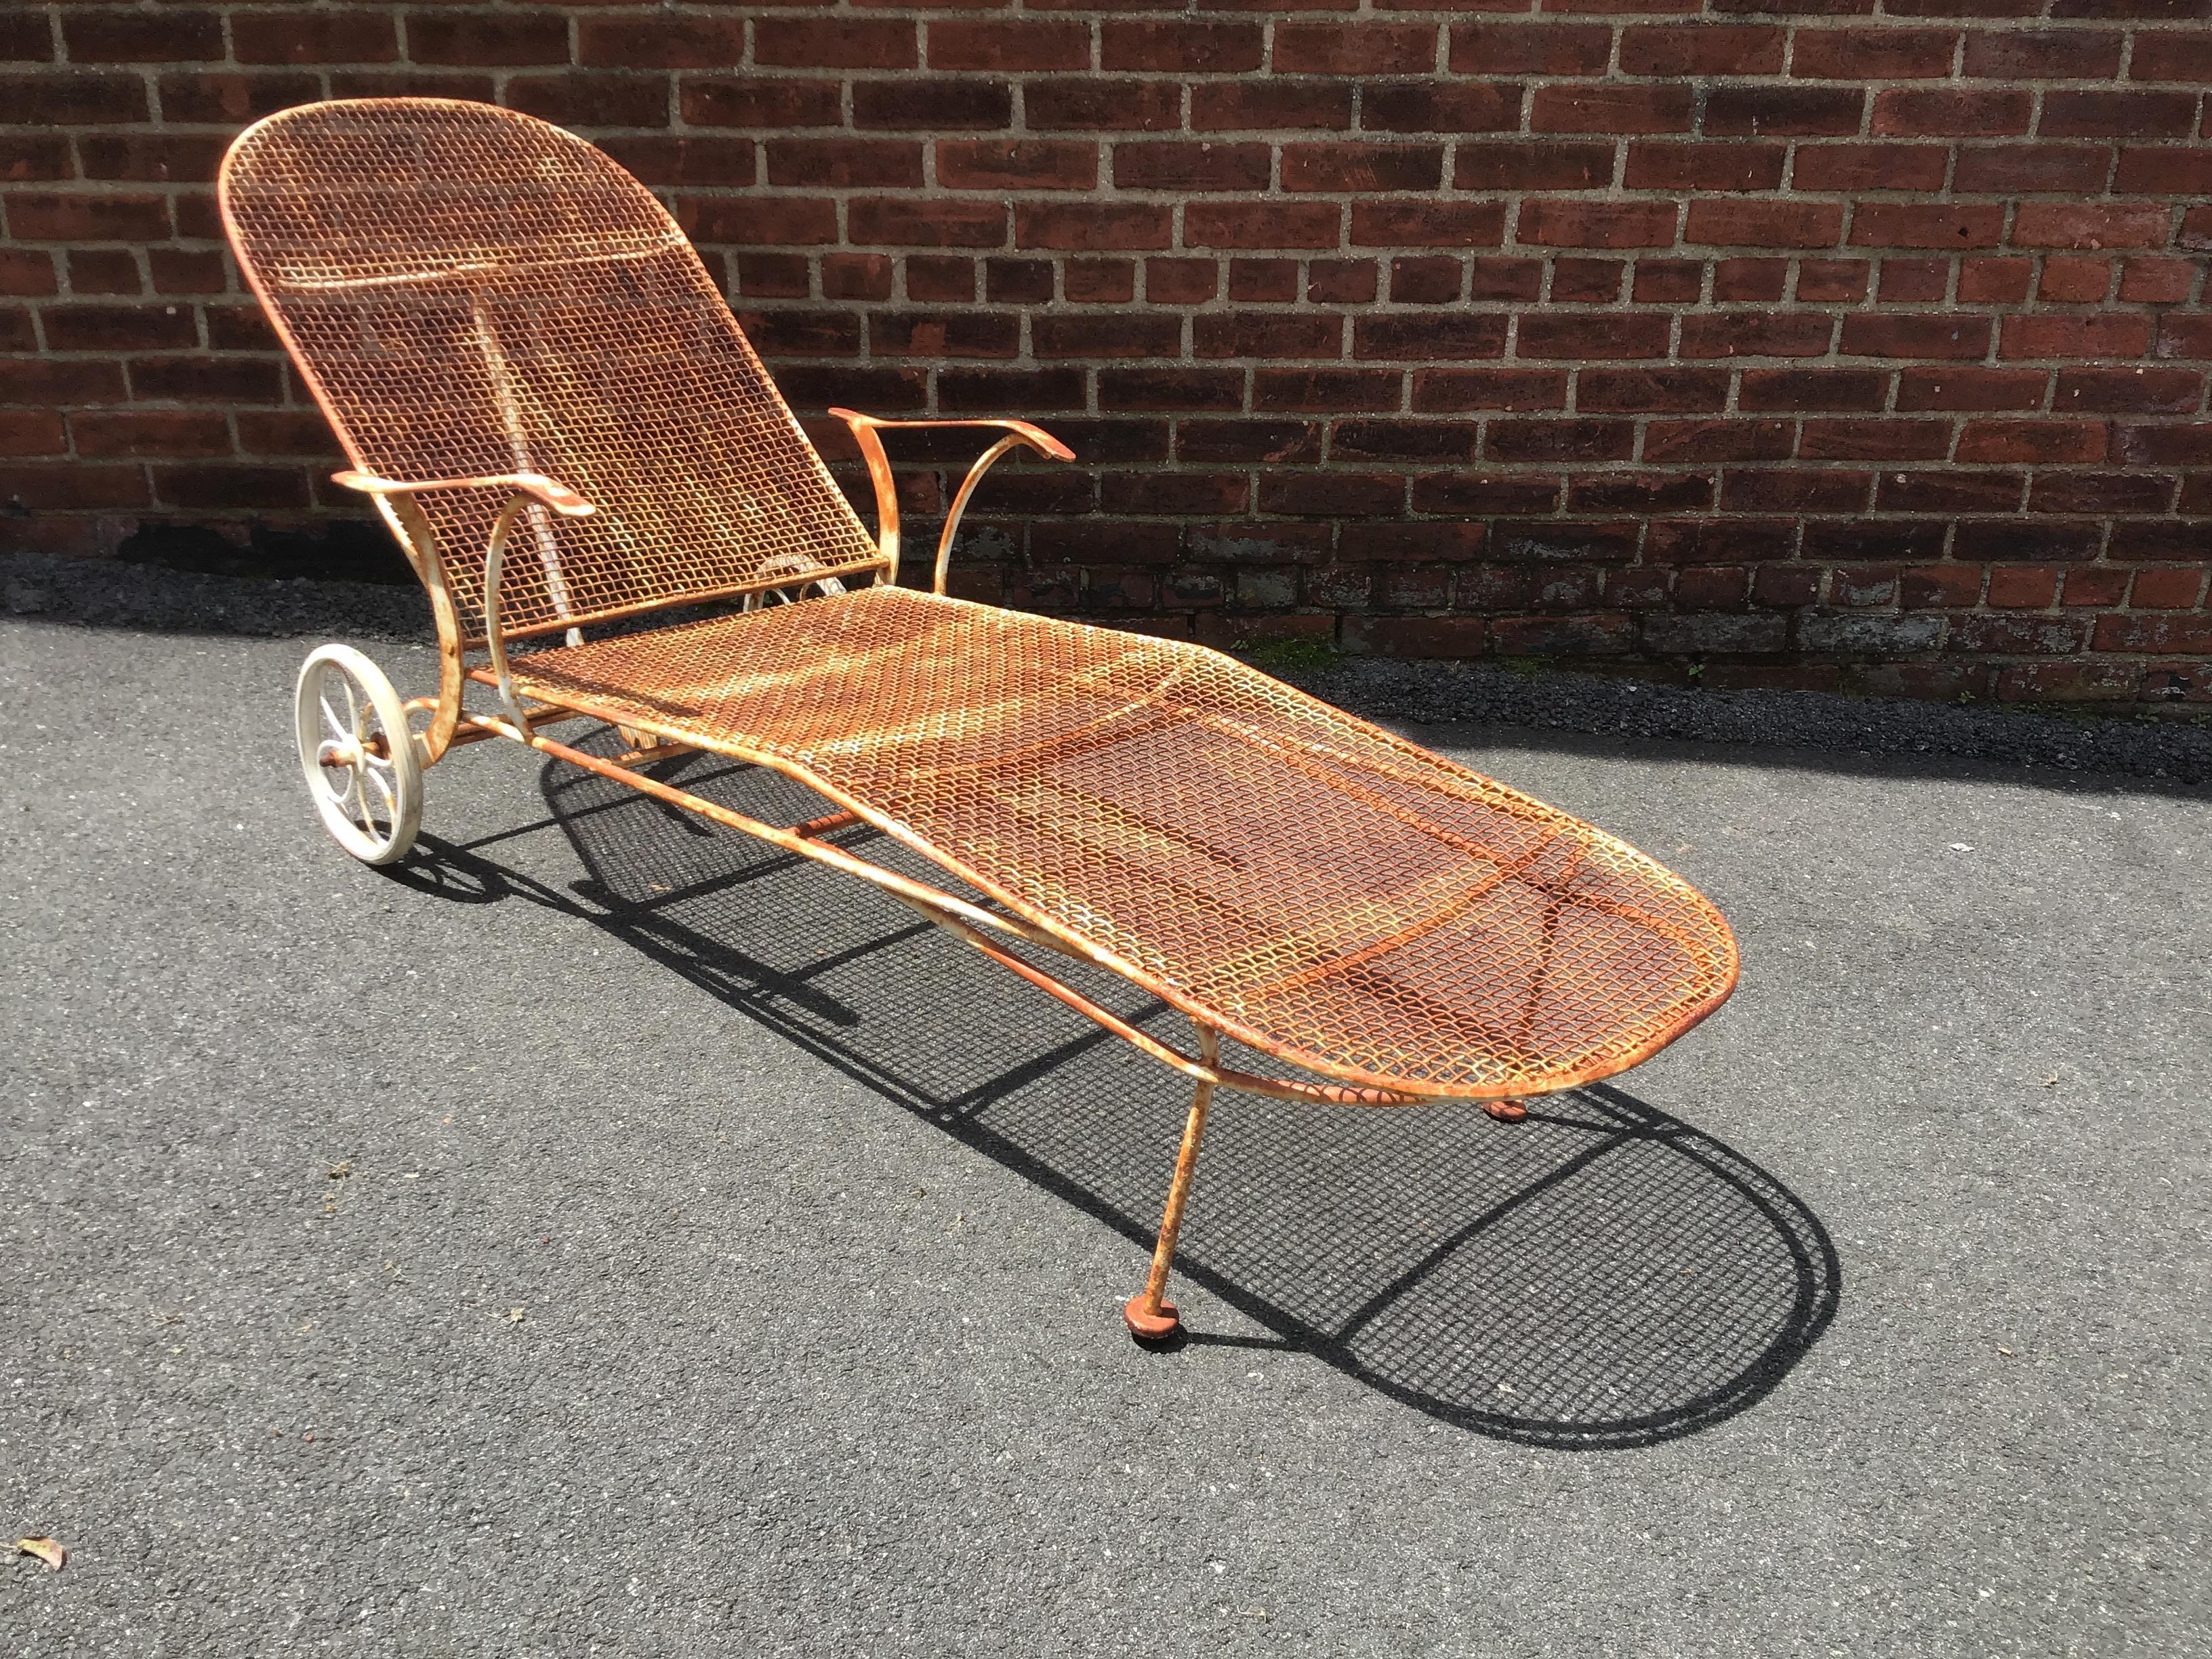 1950s sculptura iron chaise lounge by Woodard.
Needs painting.